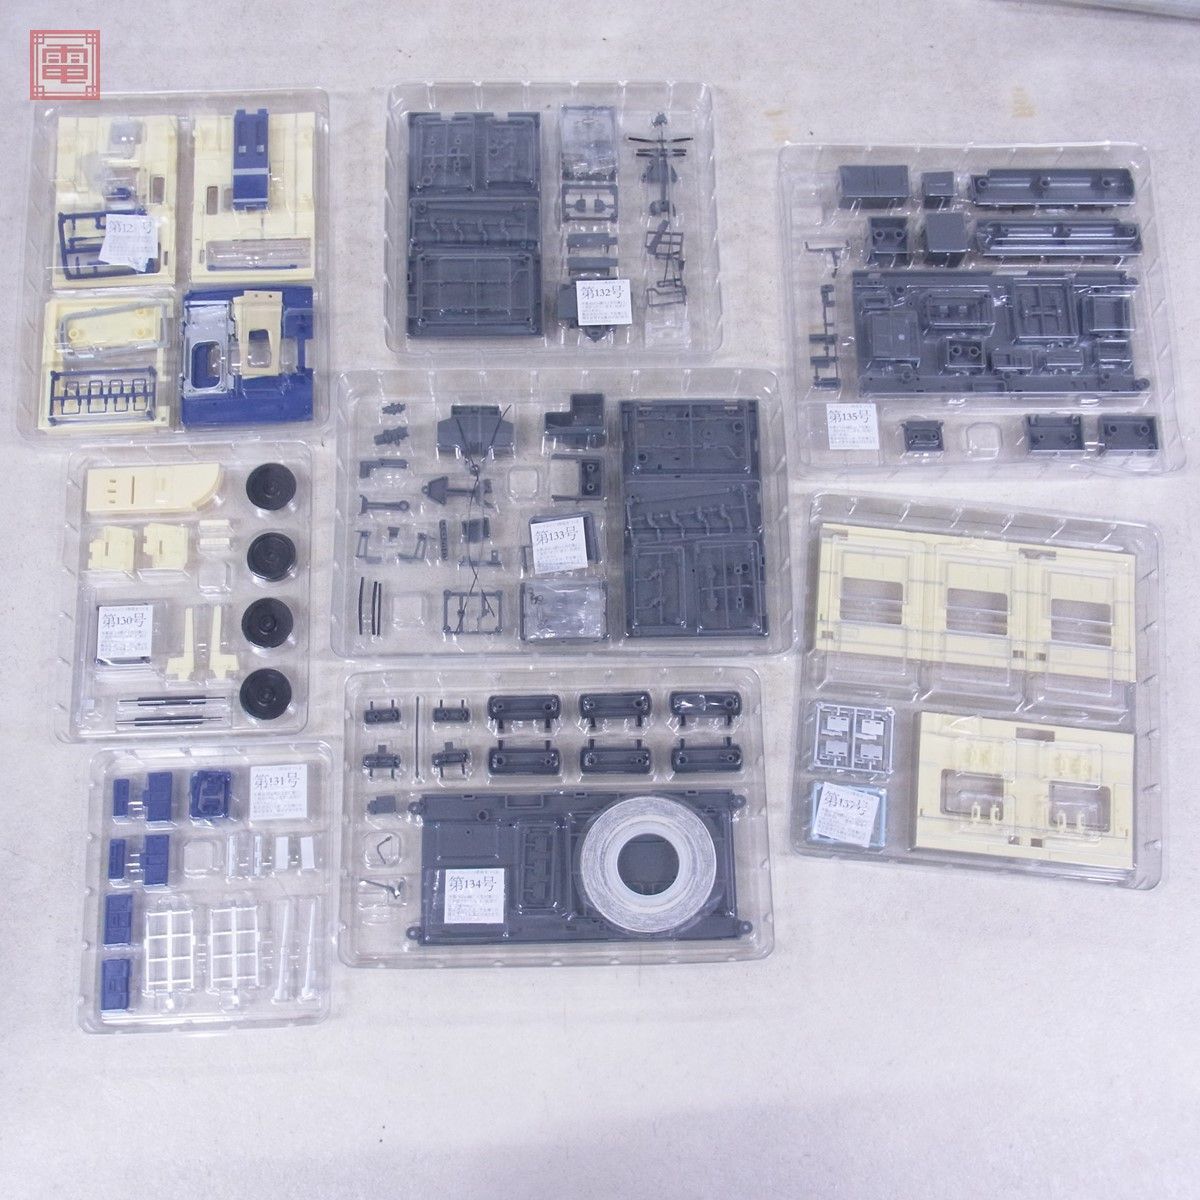  not yet constructed asheto1/32 blue to rain 3 vehicle .... extension number no. 121 number ~177 number set . pcs Special sudden [.. attaching ]A. pcs passenger car railroad model present condition goods [60